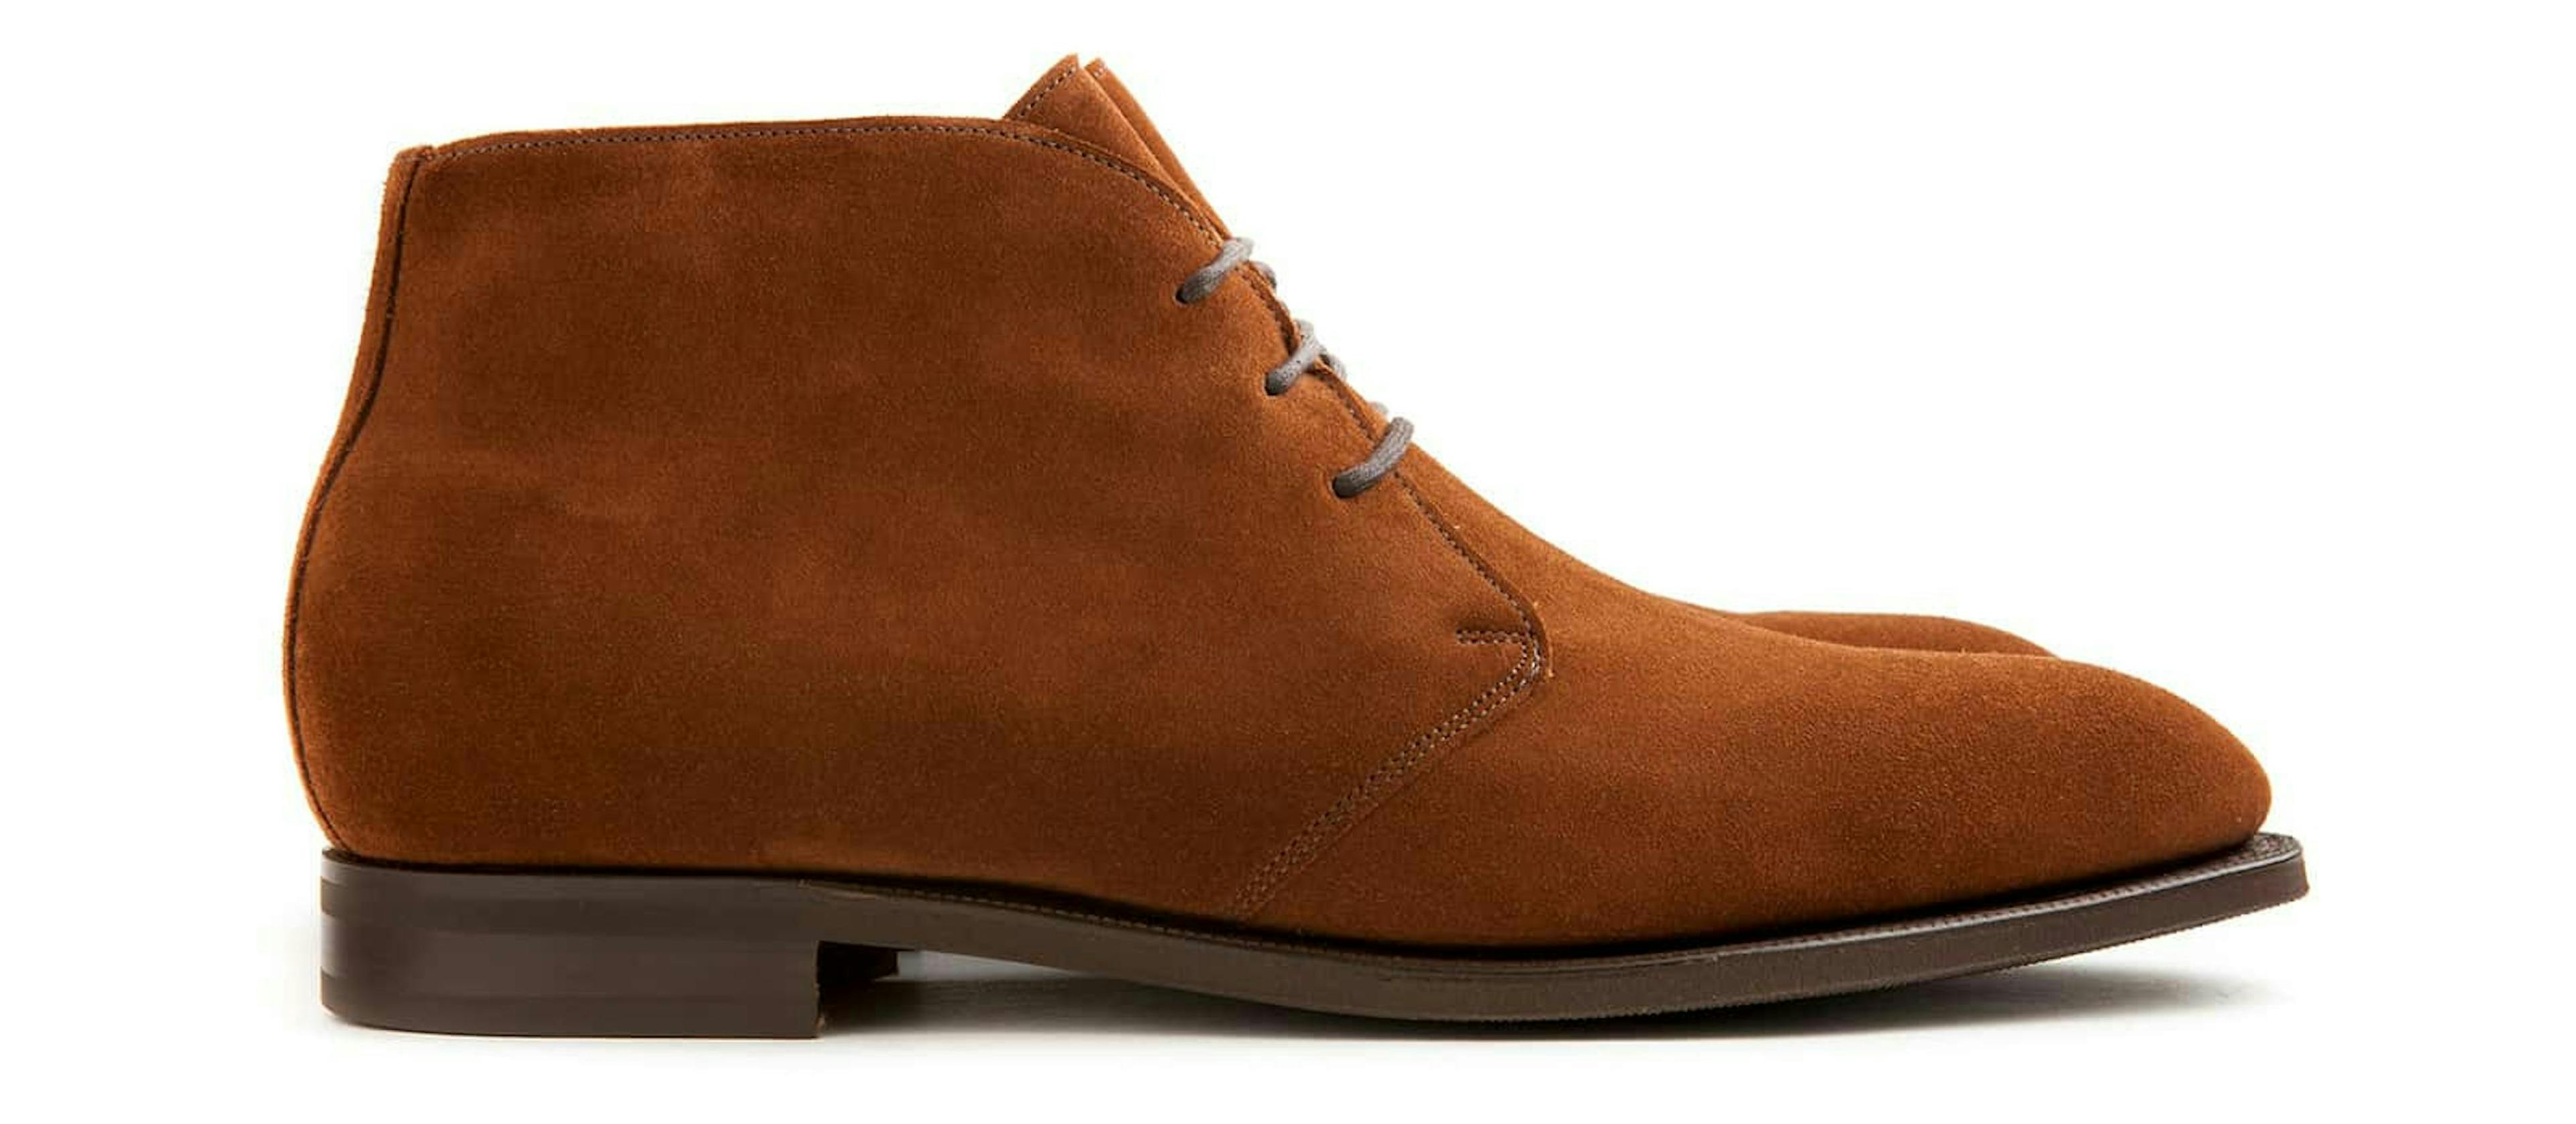 Side view of an Edward Green Banbury in Snuff Suede.